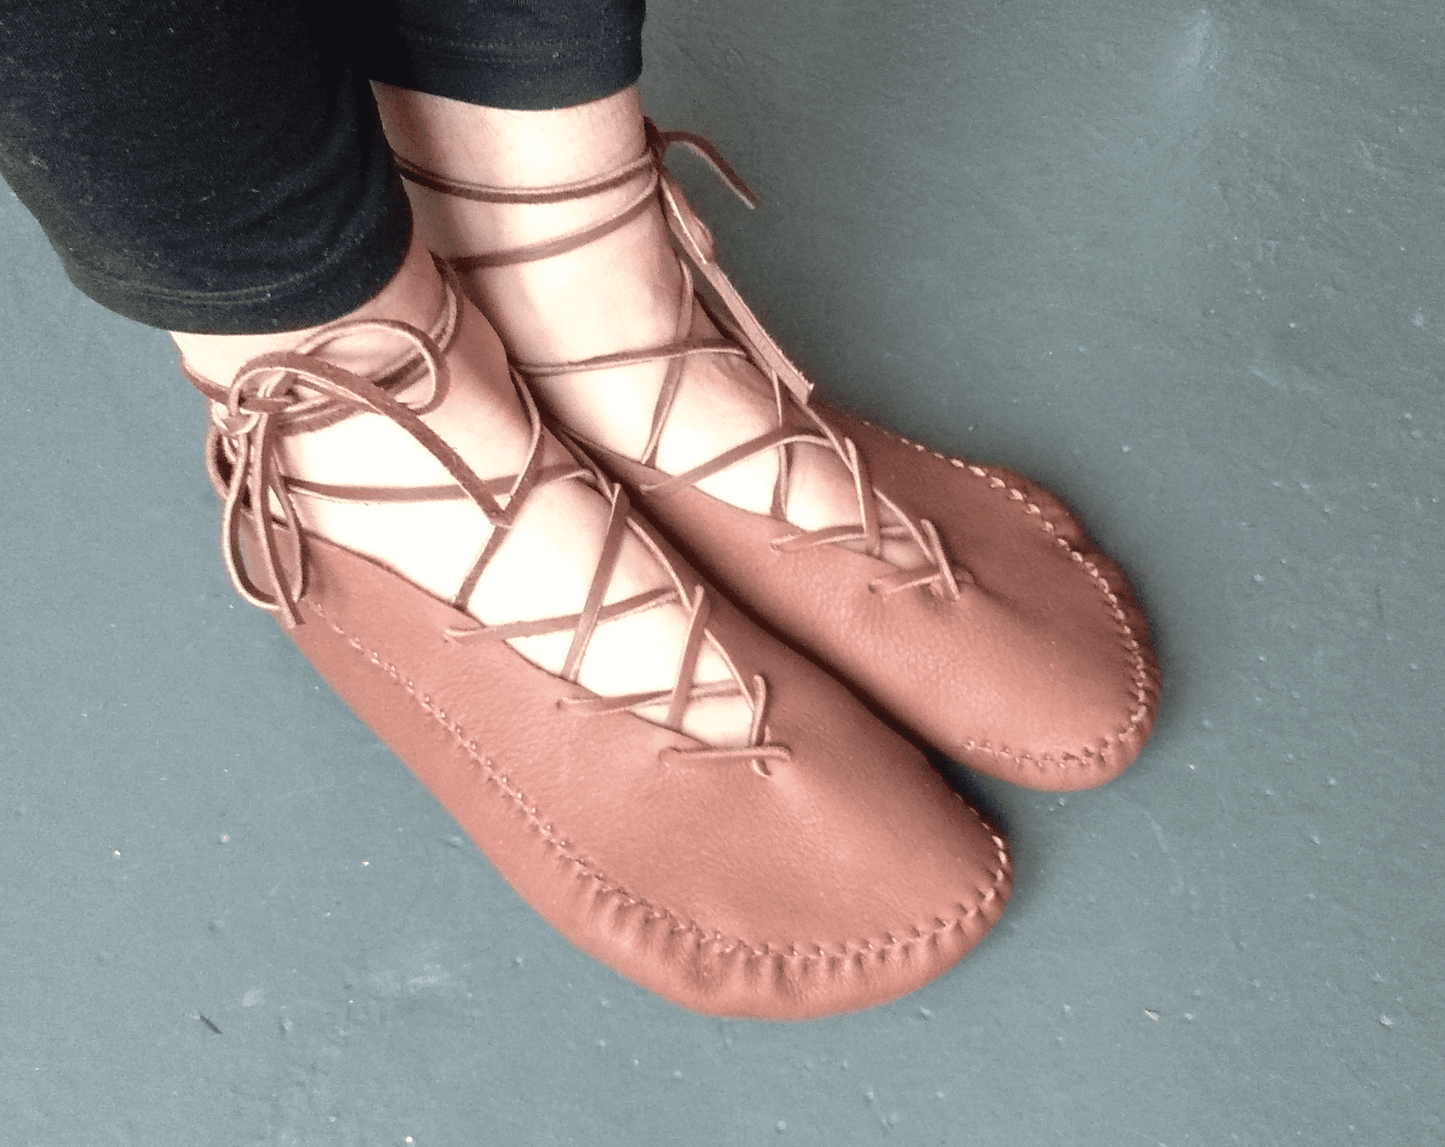 "The Summer" Moccasins / Custom-Made Barefoot Shoes Earthingmoccasins